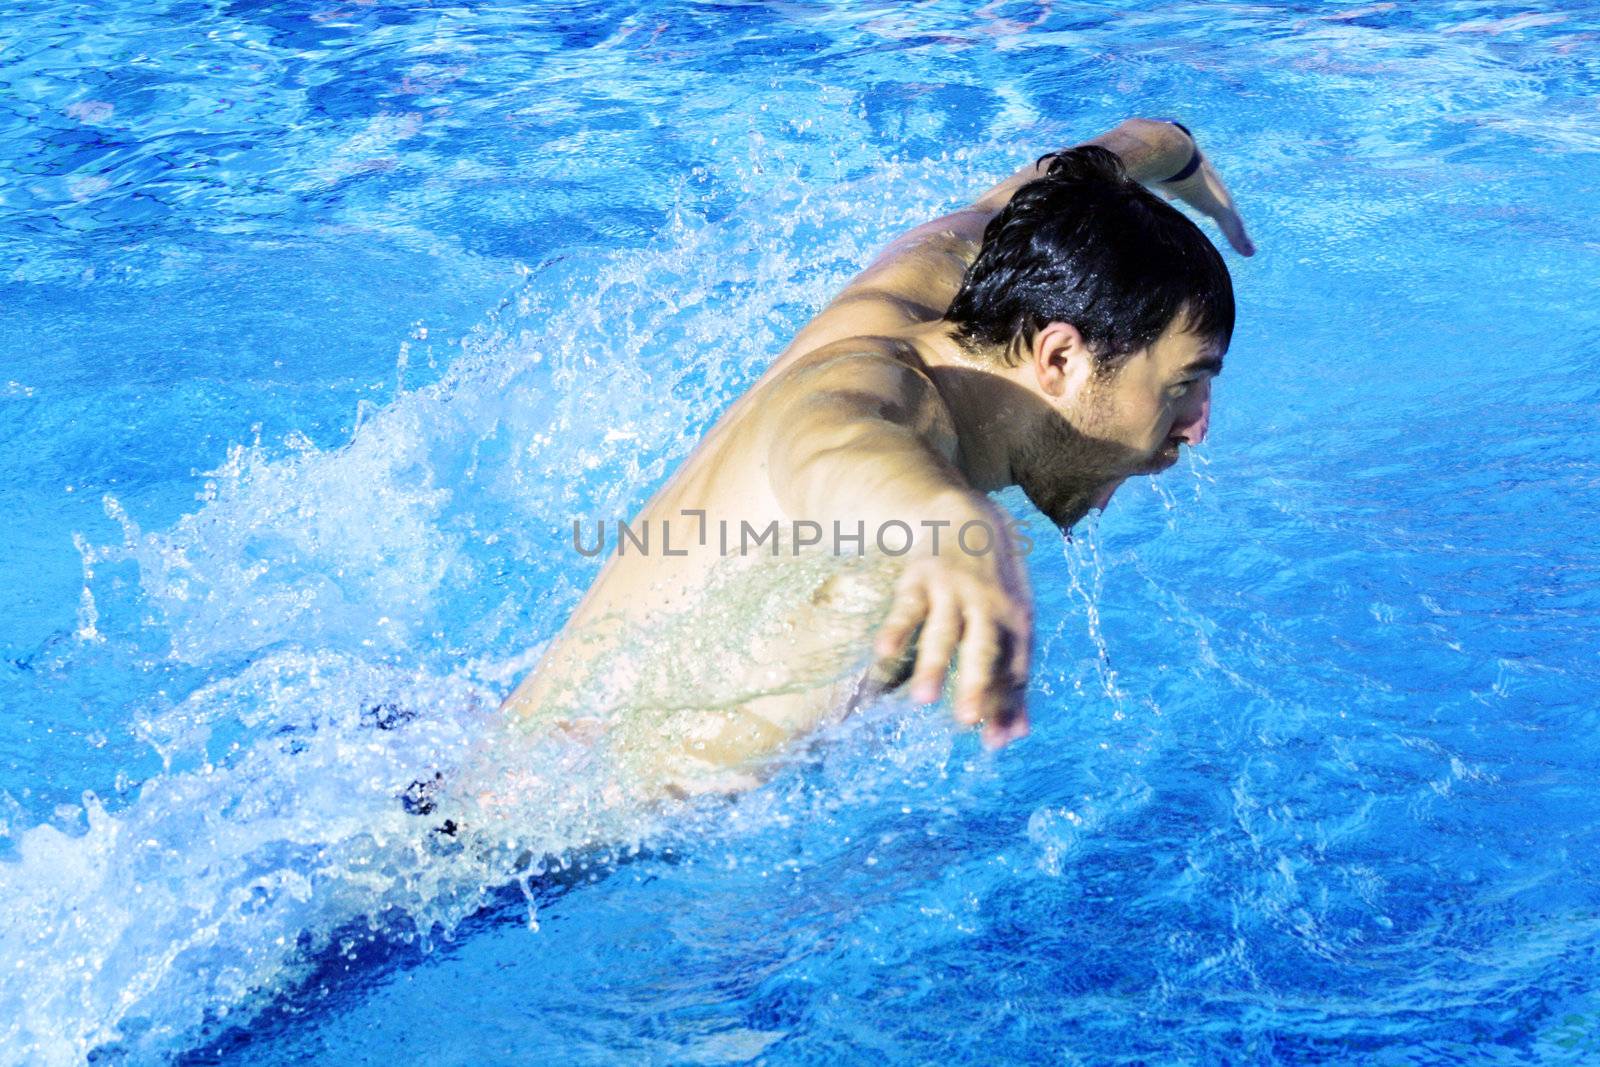 hobby butterfly swimmer in pool by photochecker